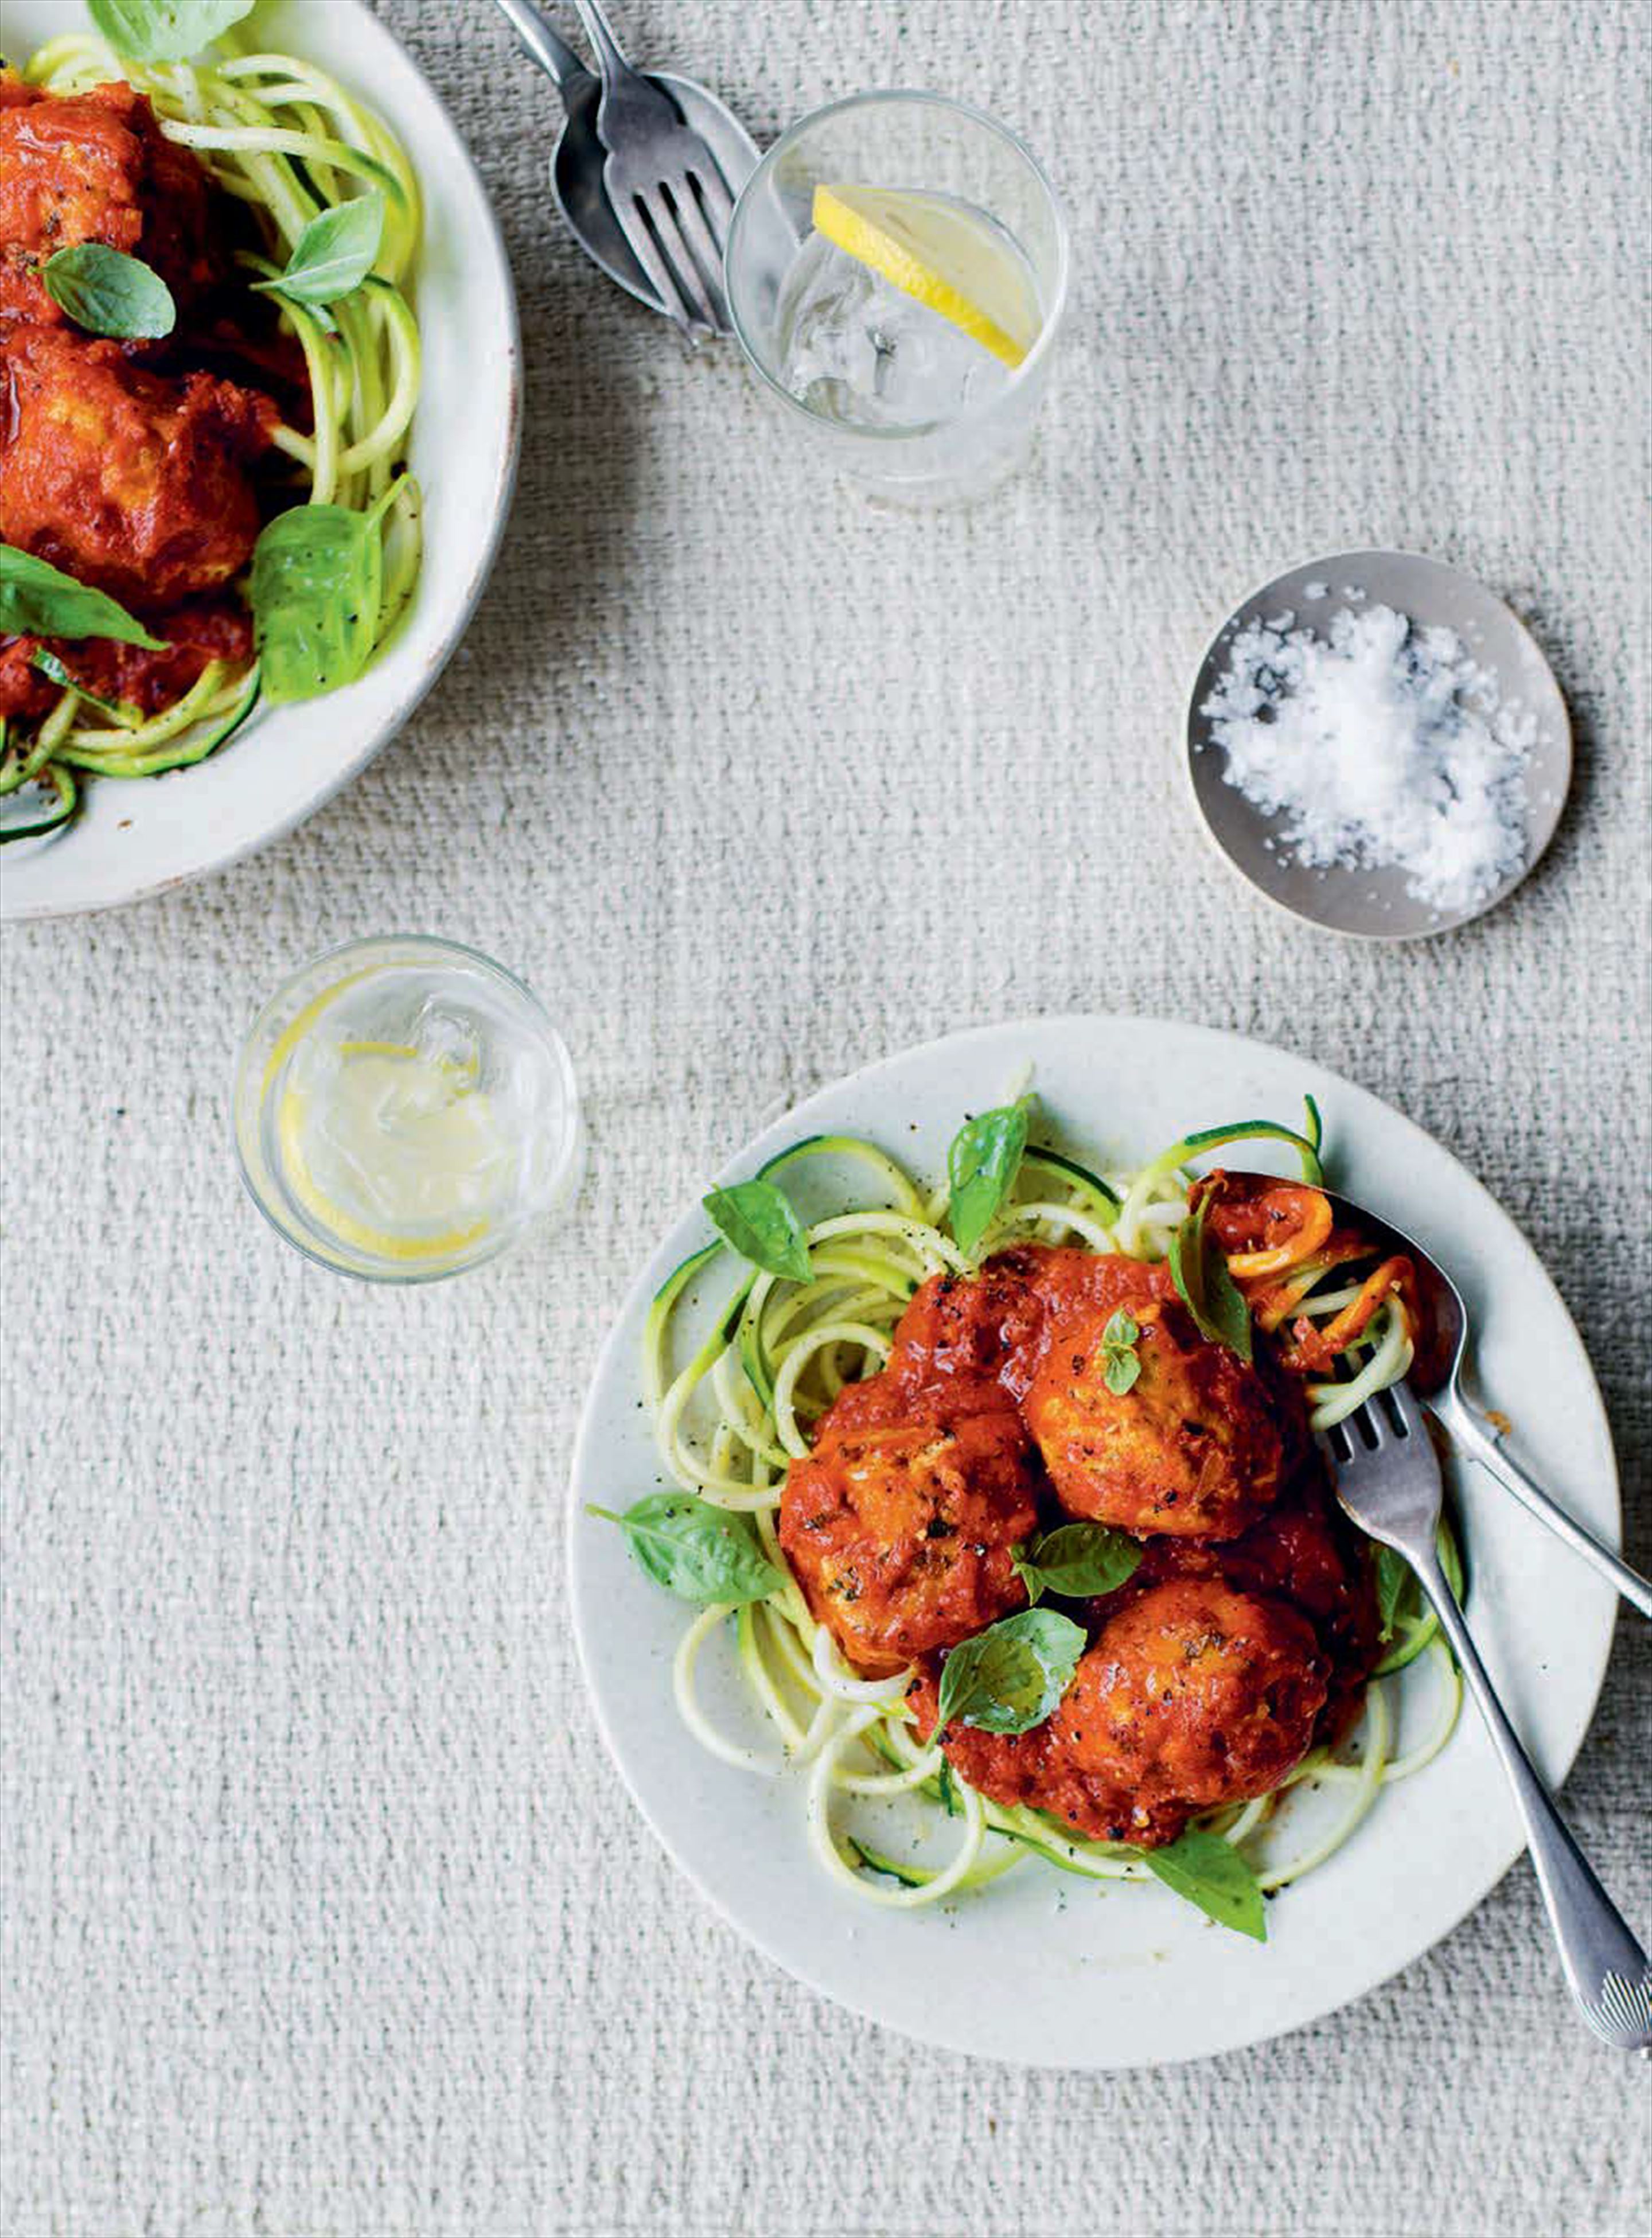 Herbed turkey meatballs with courgetti pomodoro